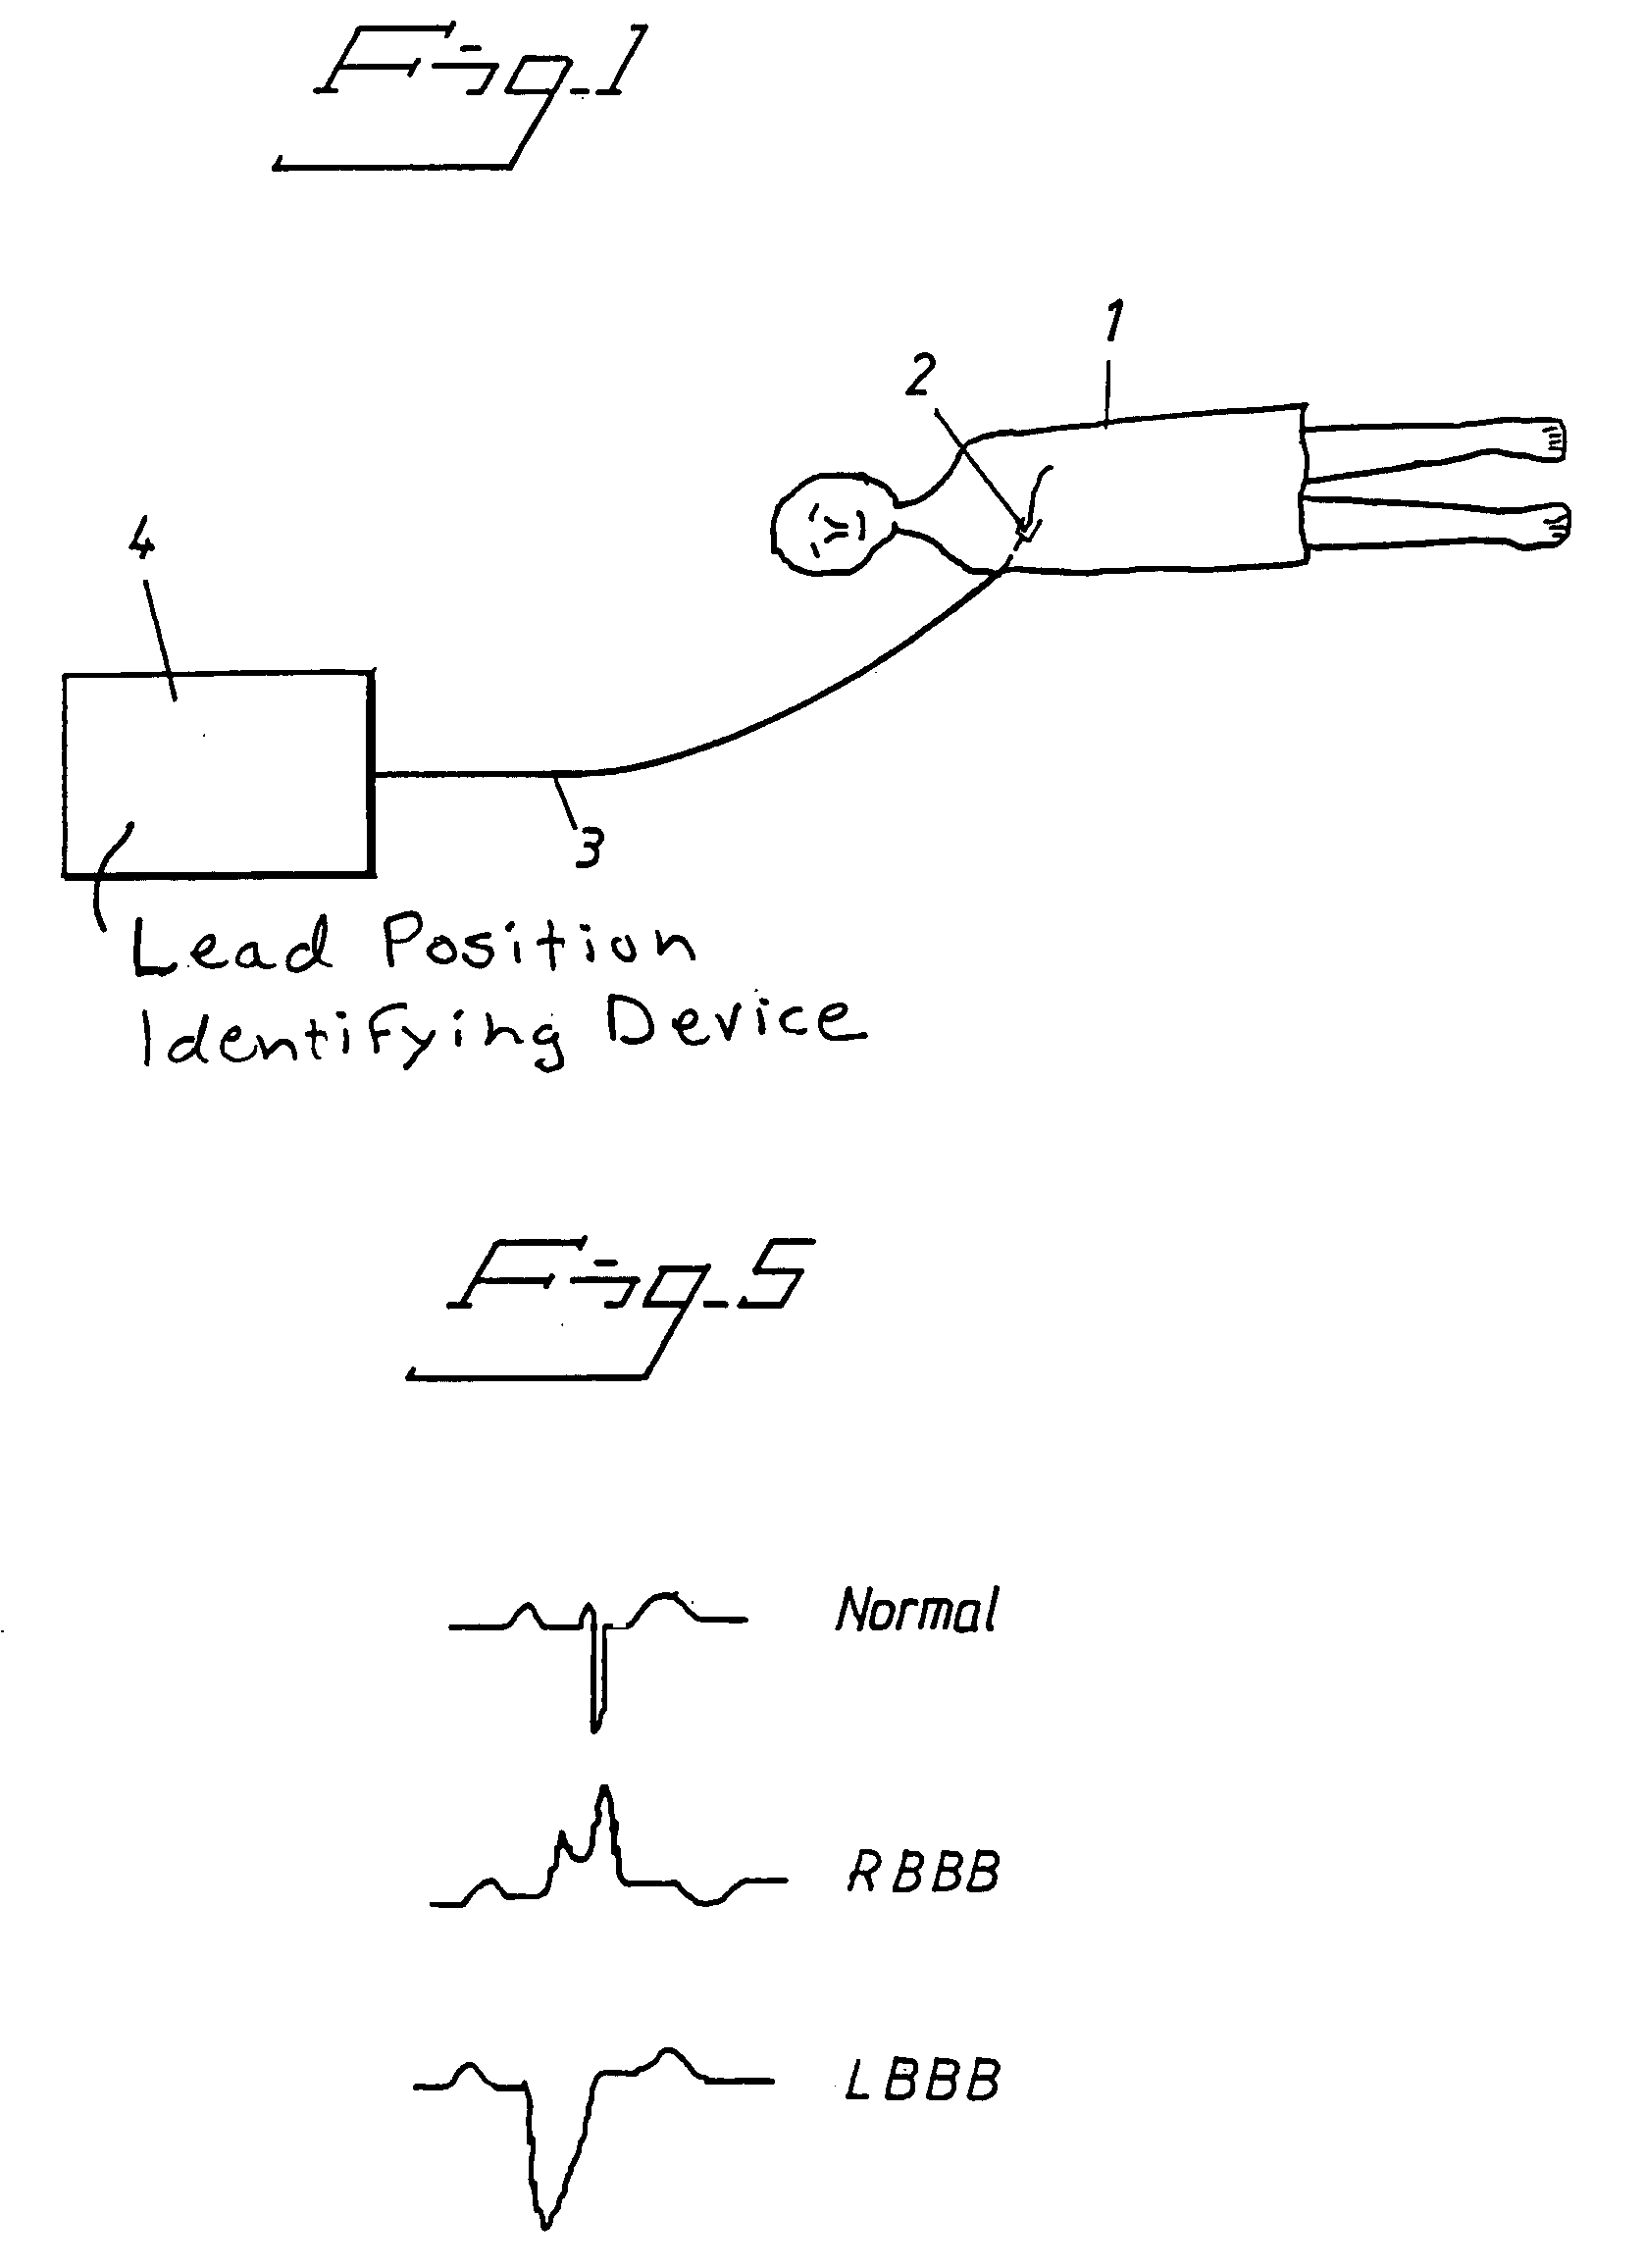 Arrangement and Method for Evaluating Operational Effectiveness of Implantable Medical Electrode Leads for Different Lead Placements